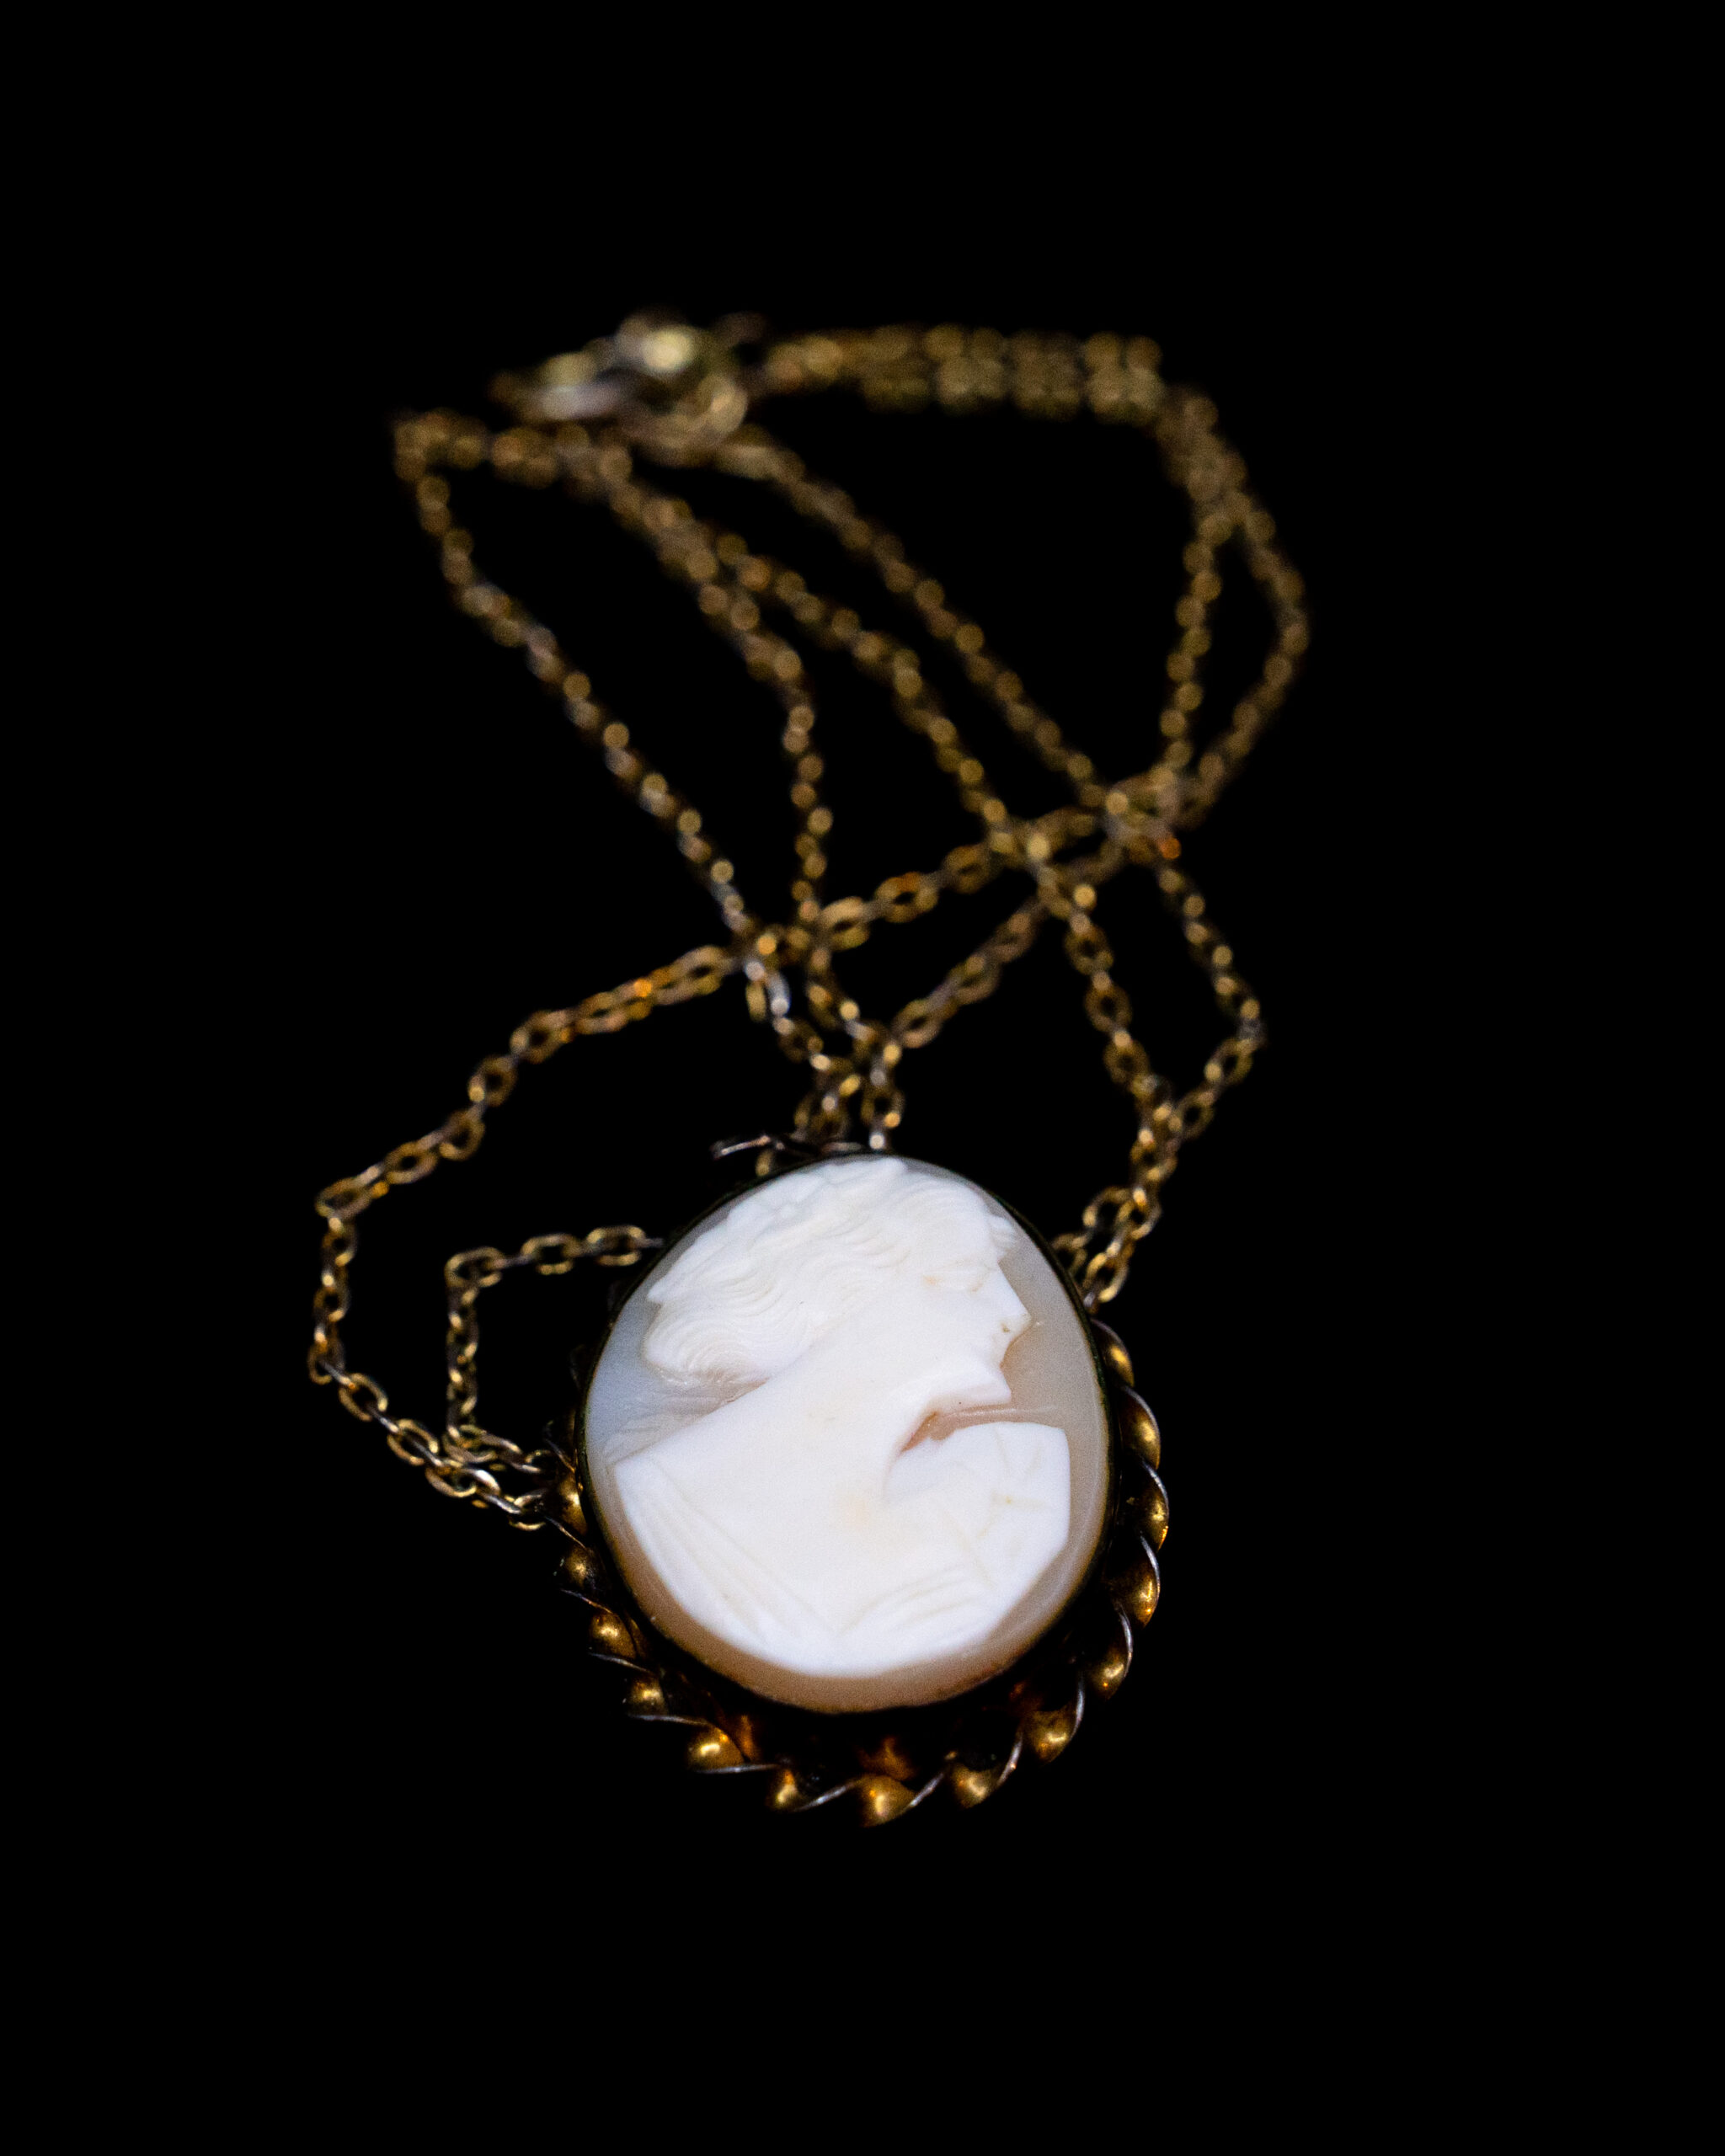 Cameo necklace Mode Art jewelry New York Vintage